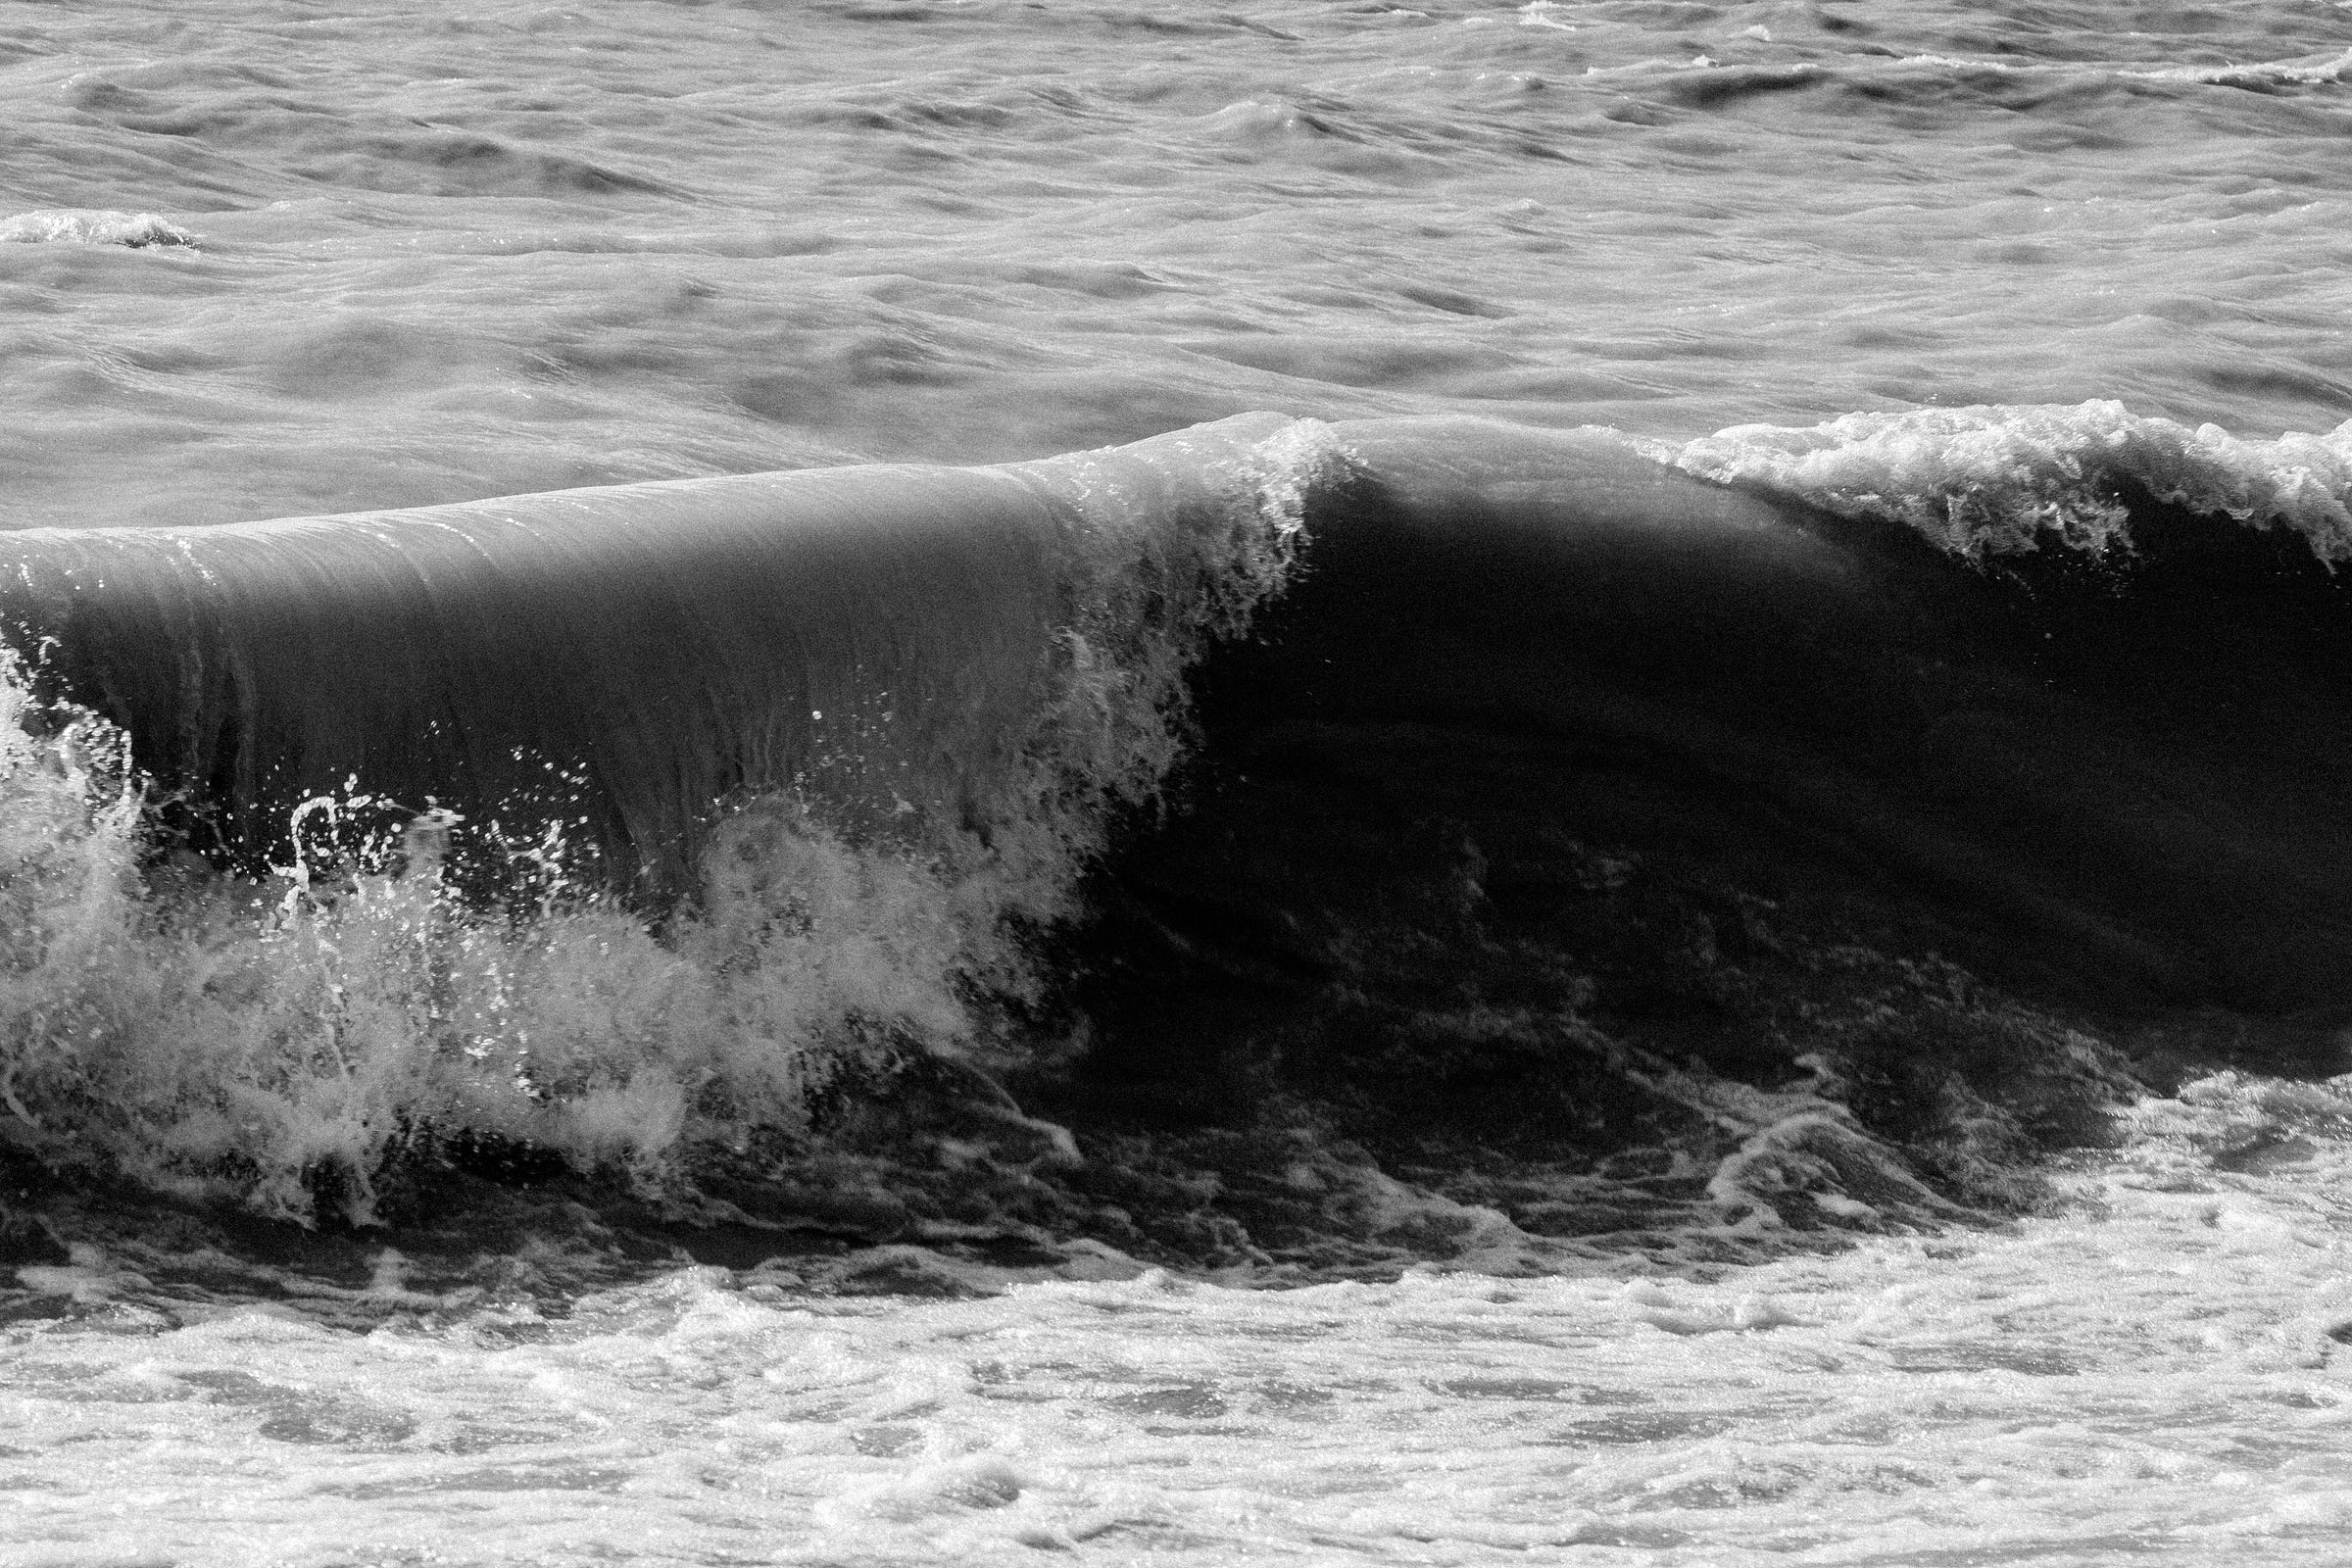 Black and white image of a wave breaking